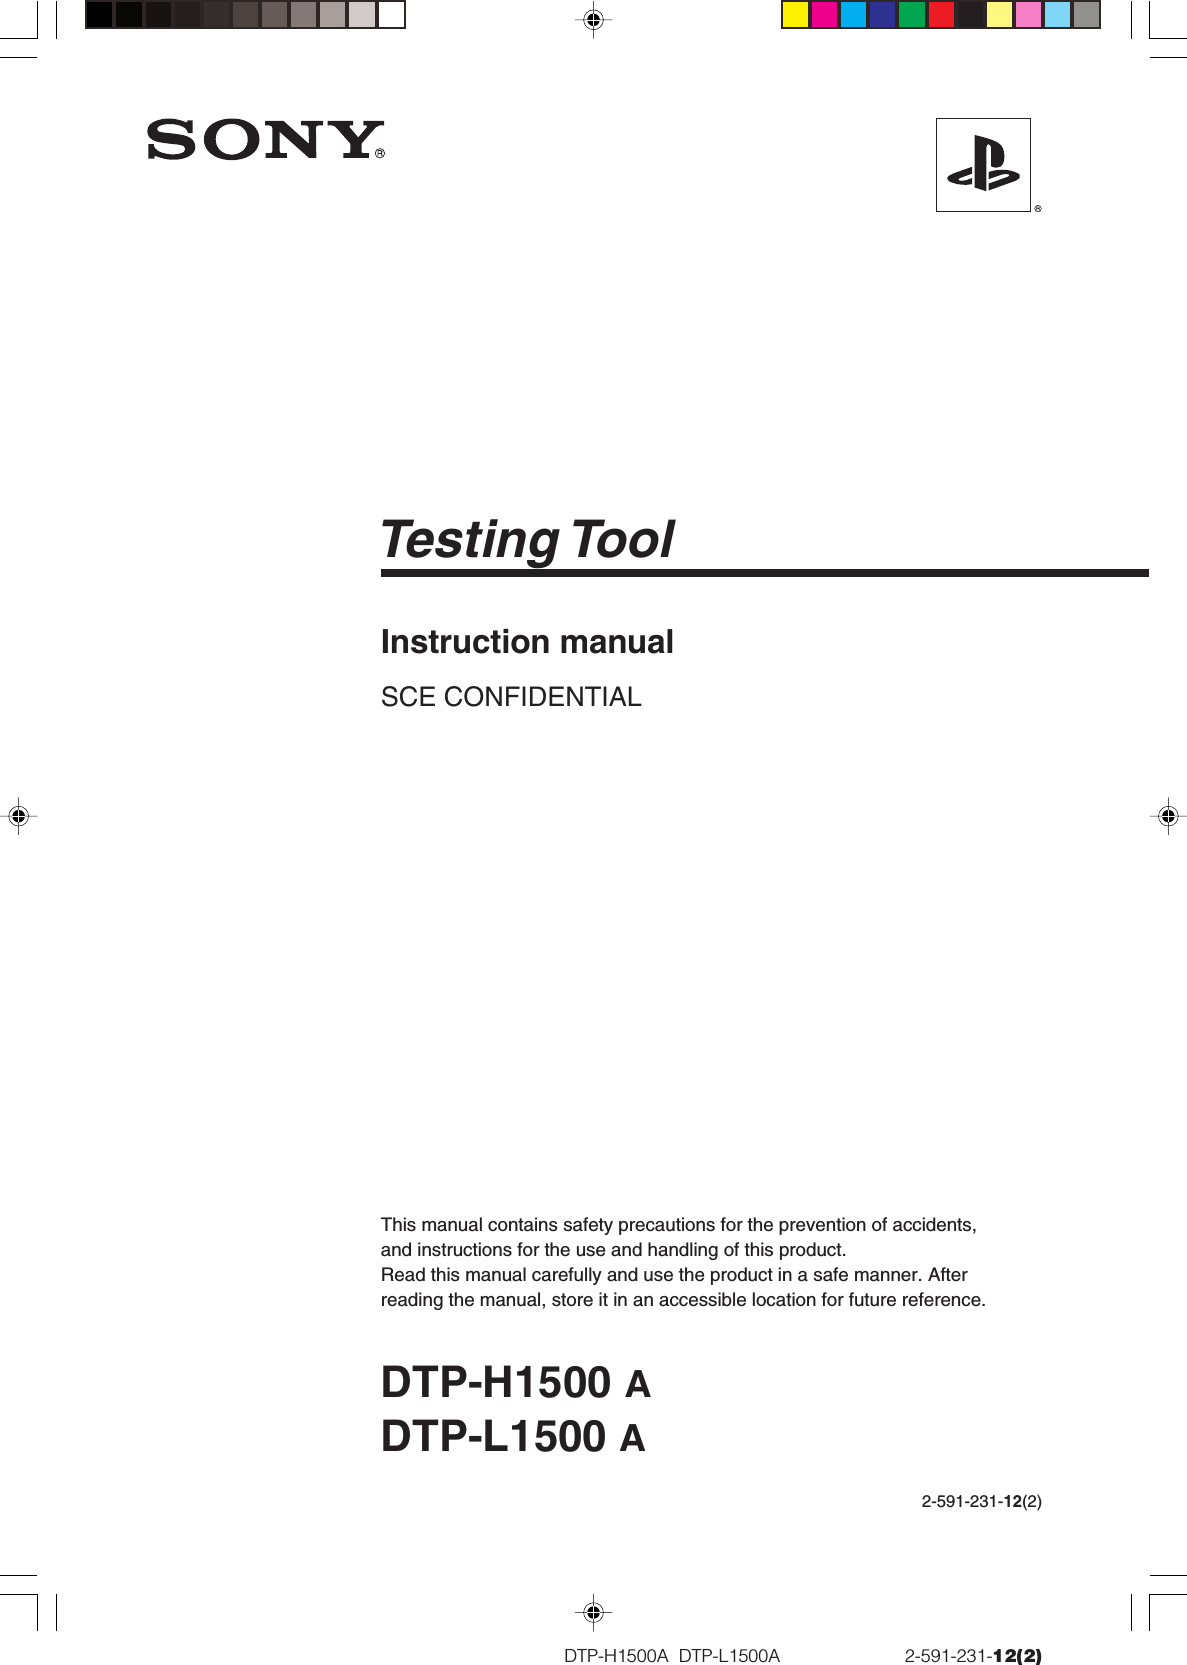 DTP-H1500A  DTP-L1500A                         2-591-231-12(2)Instruction manualSCE CONFIDENTIALDTP-H1500 ADTP-L1500 ATesting ToolThis manual contains safety precautions for the prevention of accidents,and instructions for the use and handling of this product.Read this manual carefully and use the product in a safe manner. Afterreading the manual, store it in an accessible location for future reference.2-591-231-12(2)